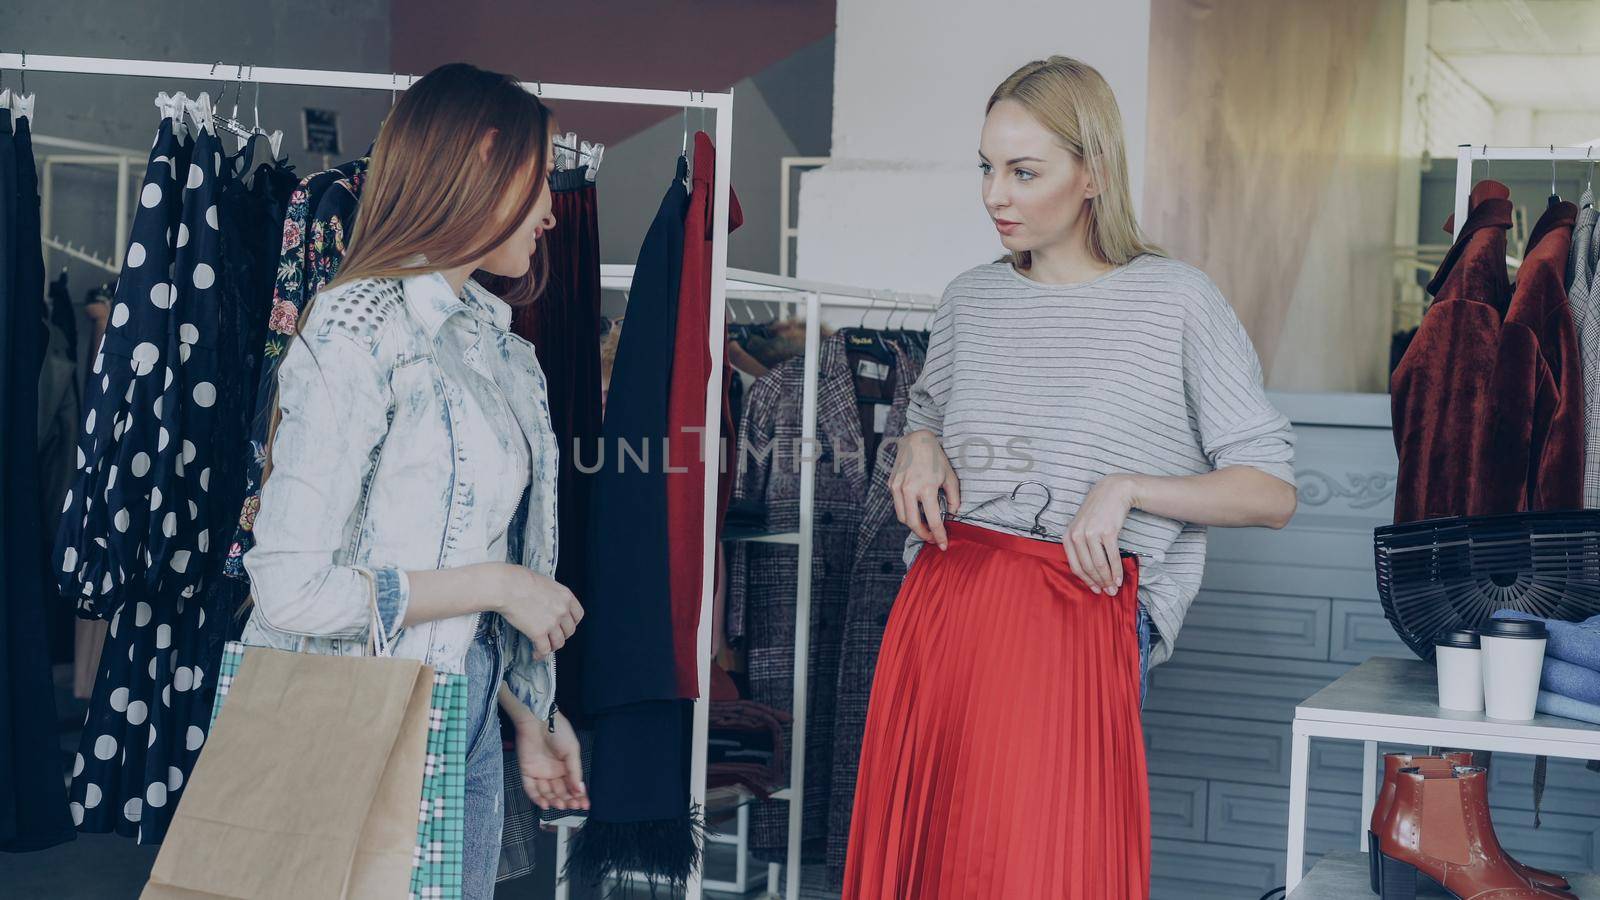 Girls are choosing clothes while standing near rails in luxurious shop. They are taking skirt, fitting it to check its size and length, talking and gesturing. by silverkblack